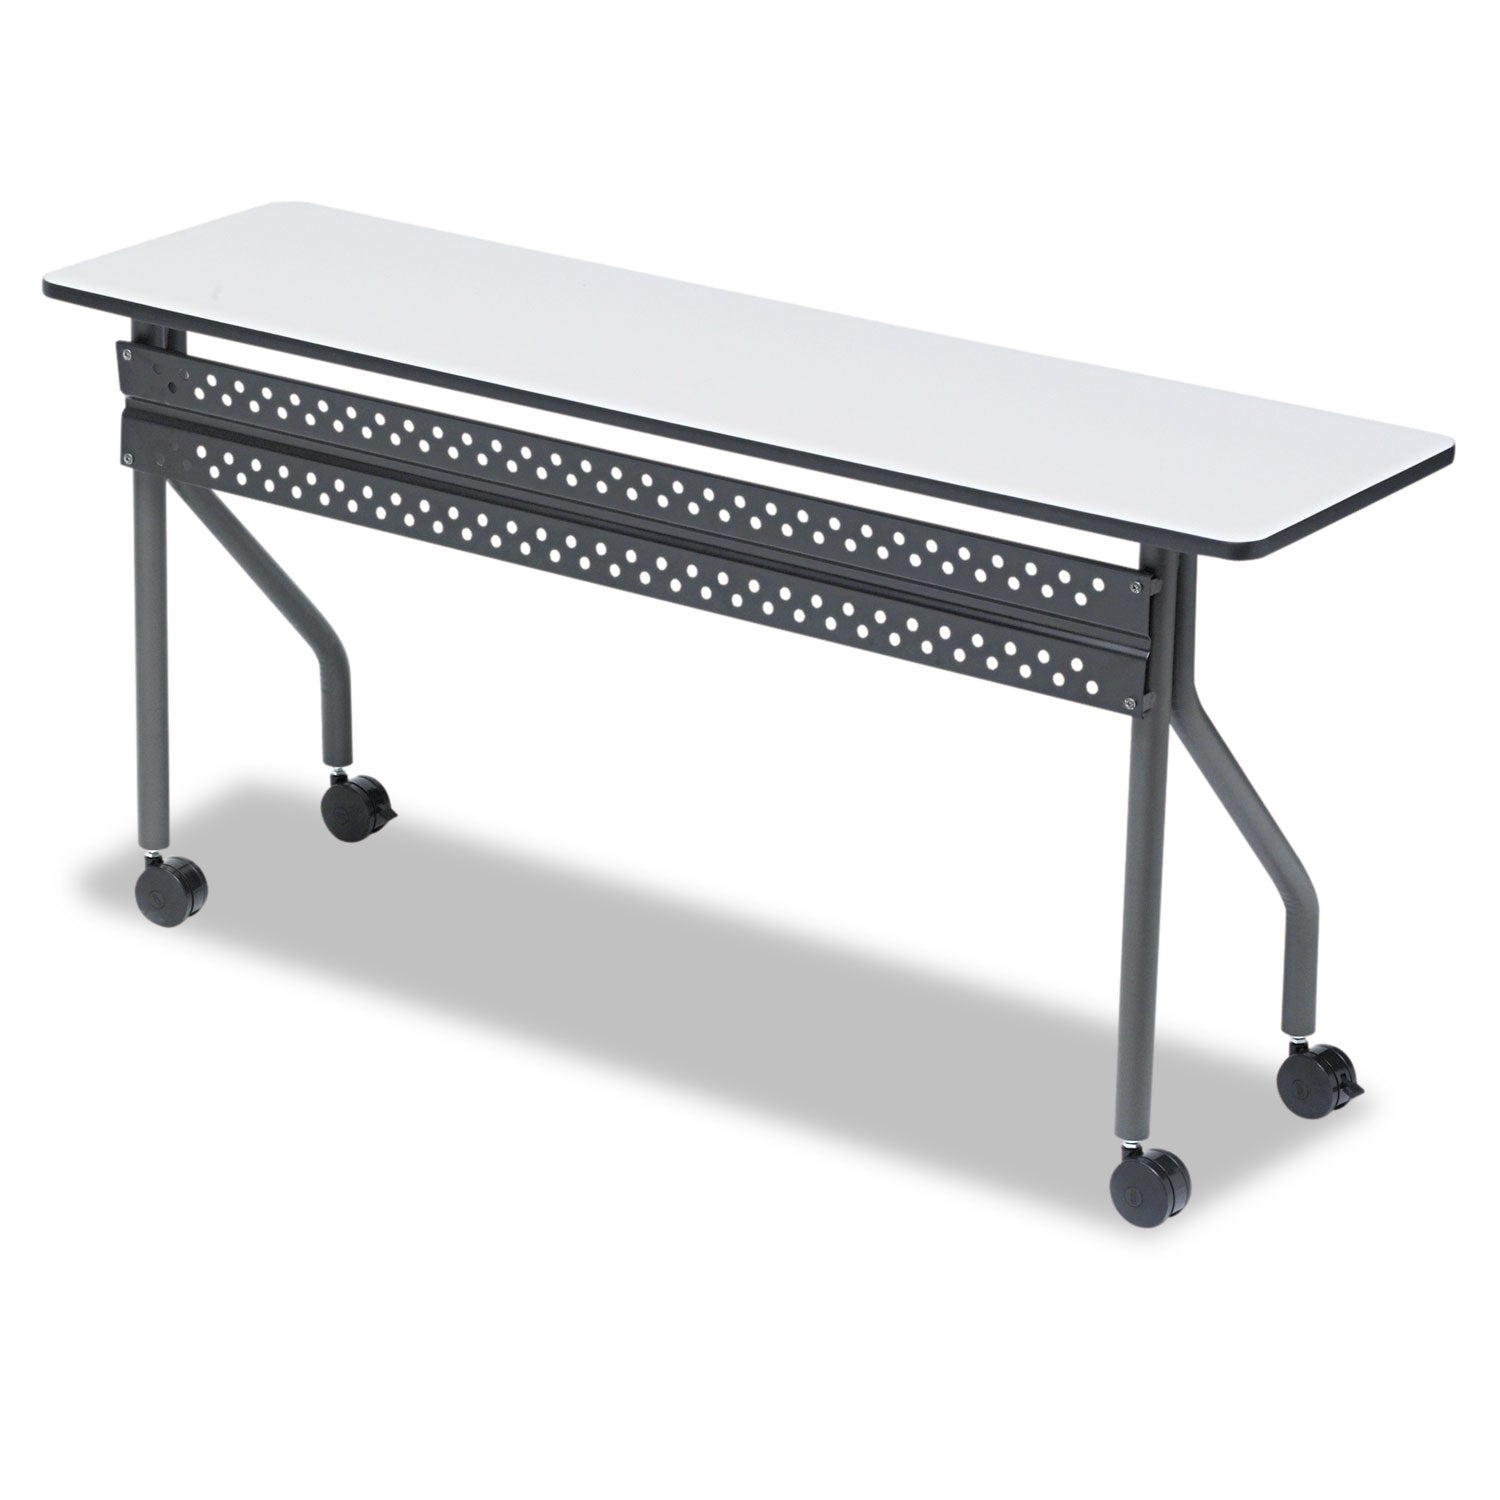 OfficeWorks Mobile Training Table, Rectangular, 60" x 18" x 29", Gray/Charcoal - 